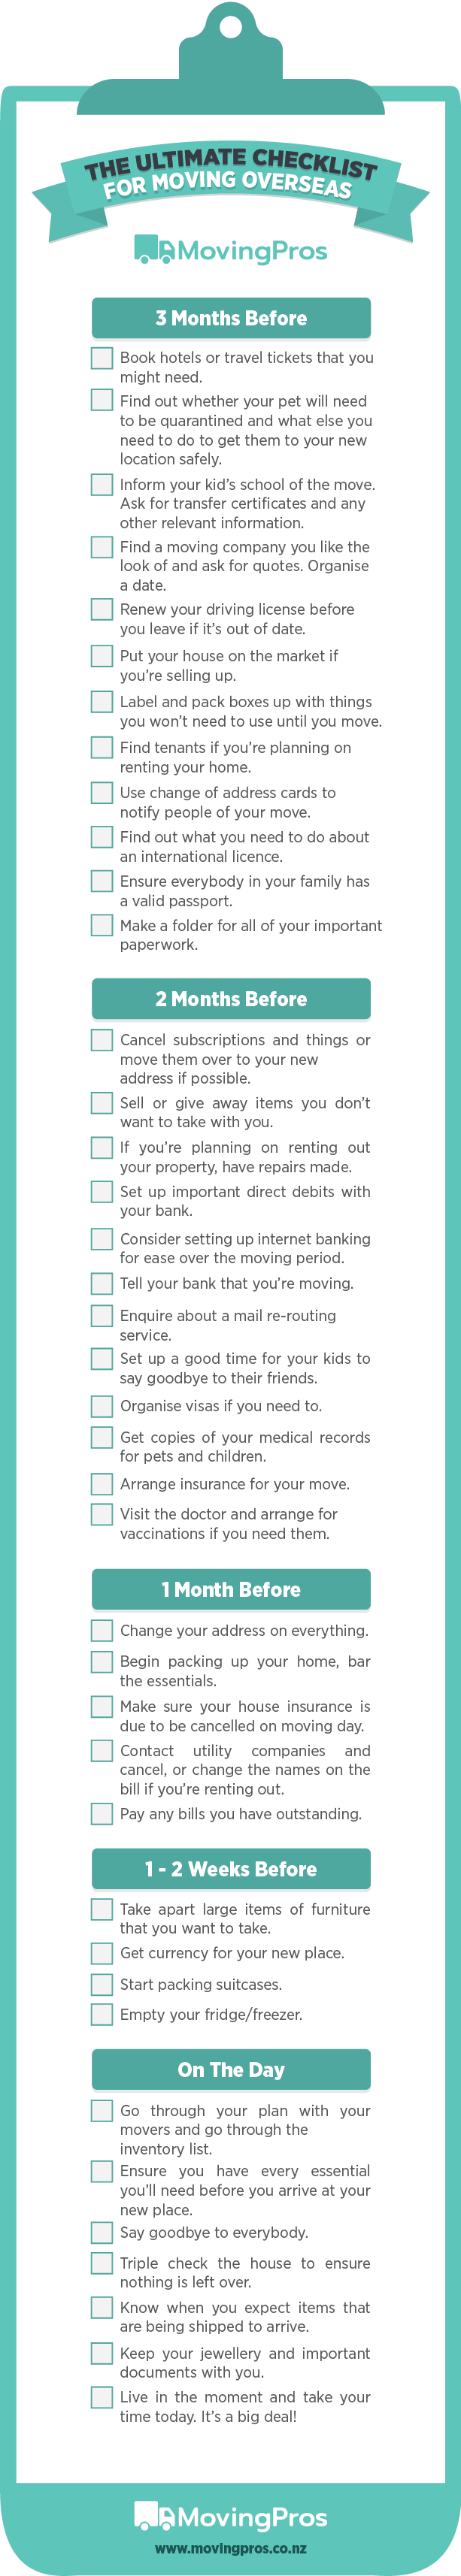 Moving Overseas Checklist Infographic